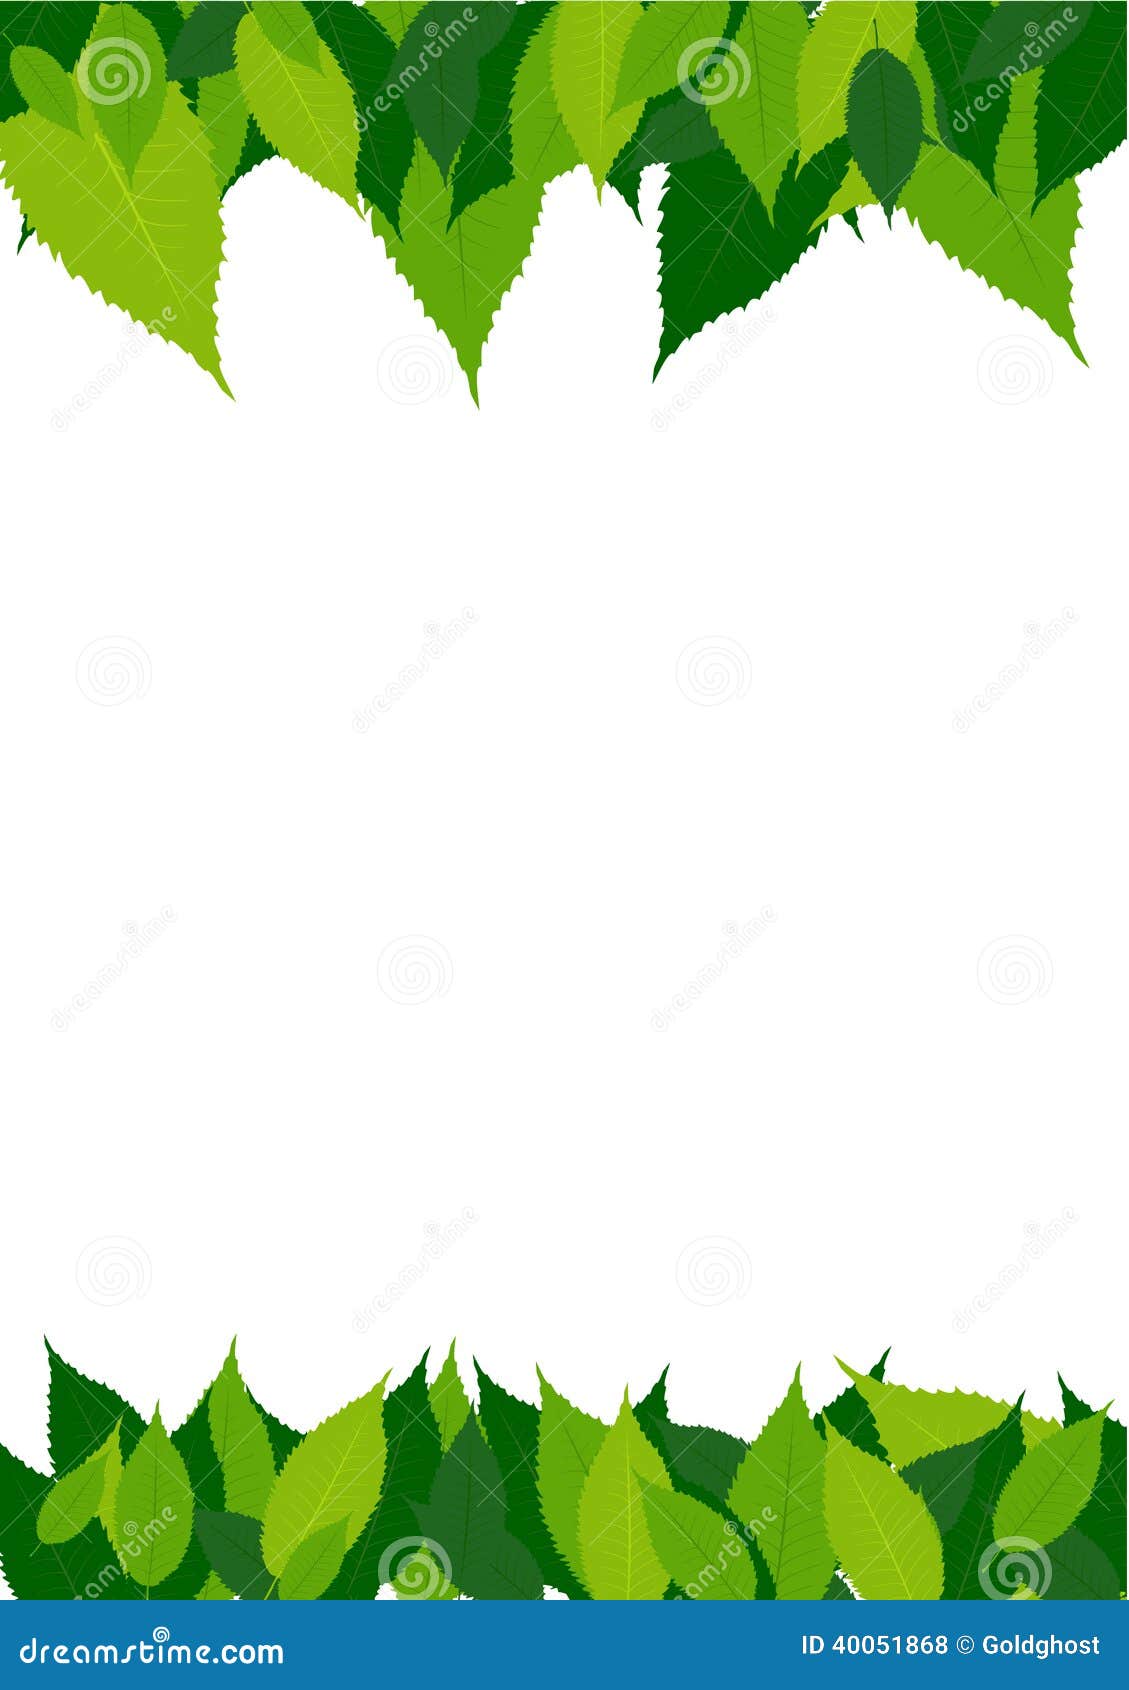 green nature clipart - photo #18